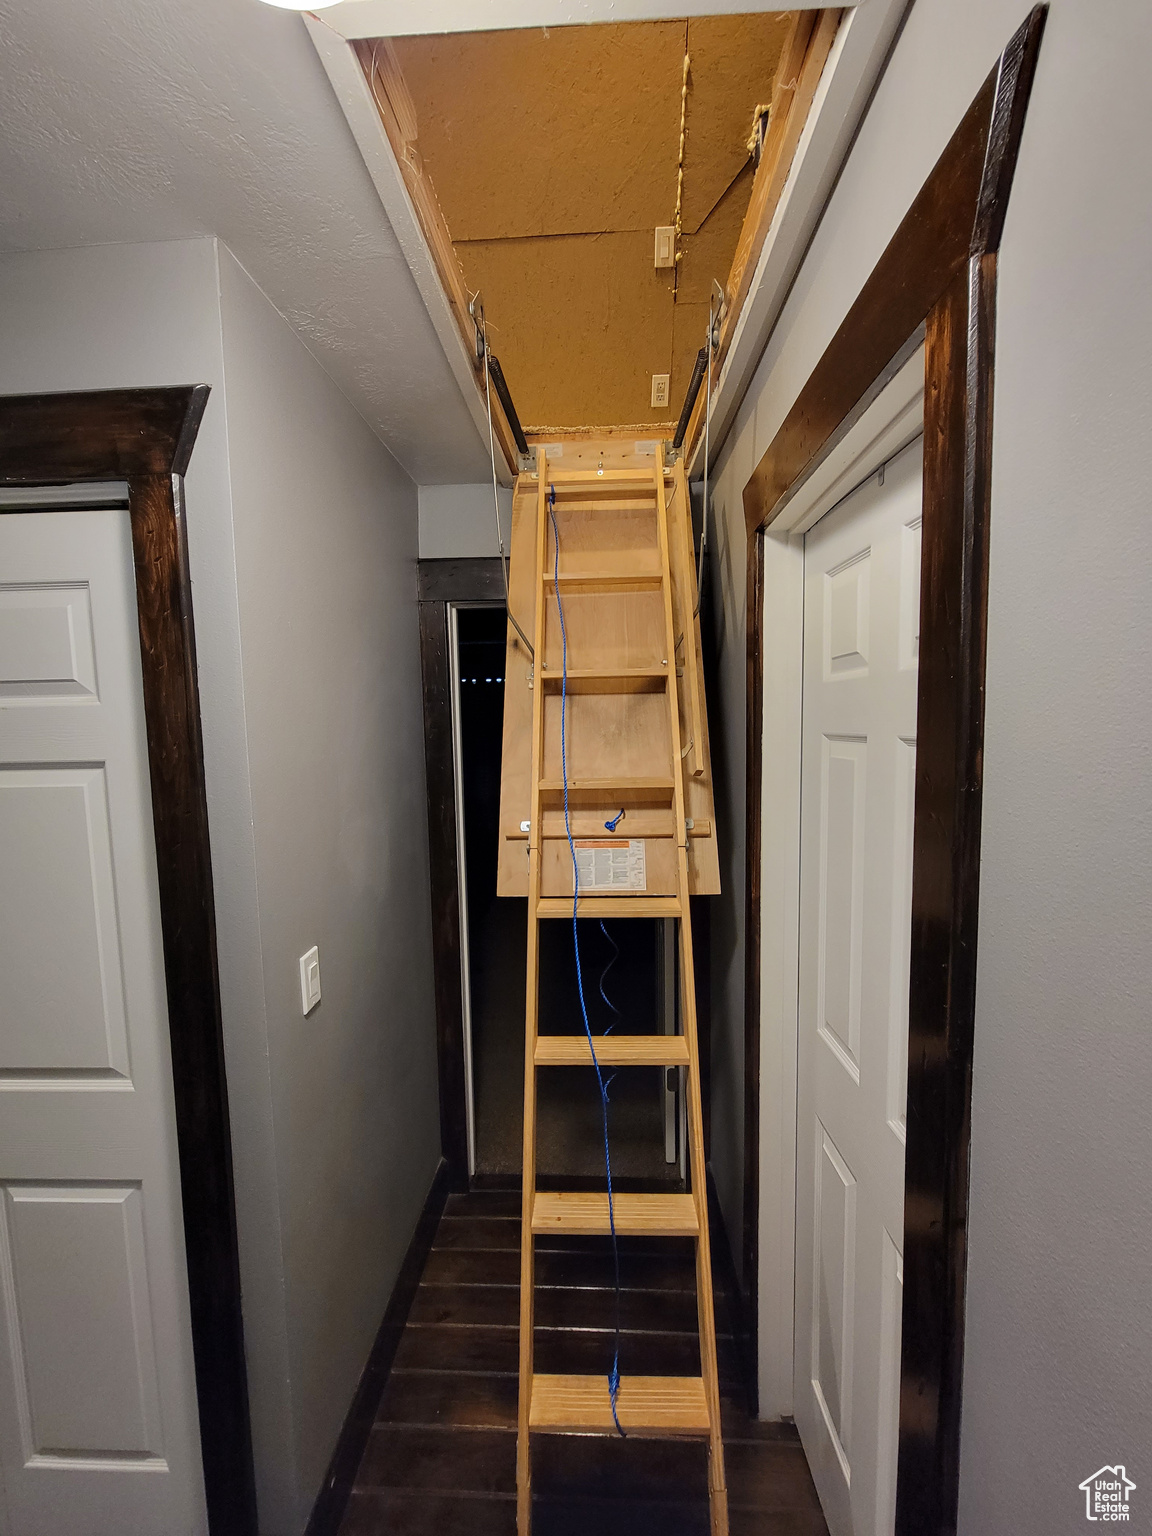 Pull-down stairs to access the attic storage